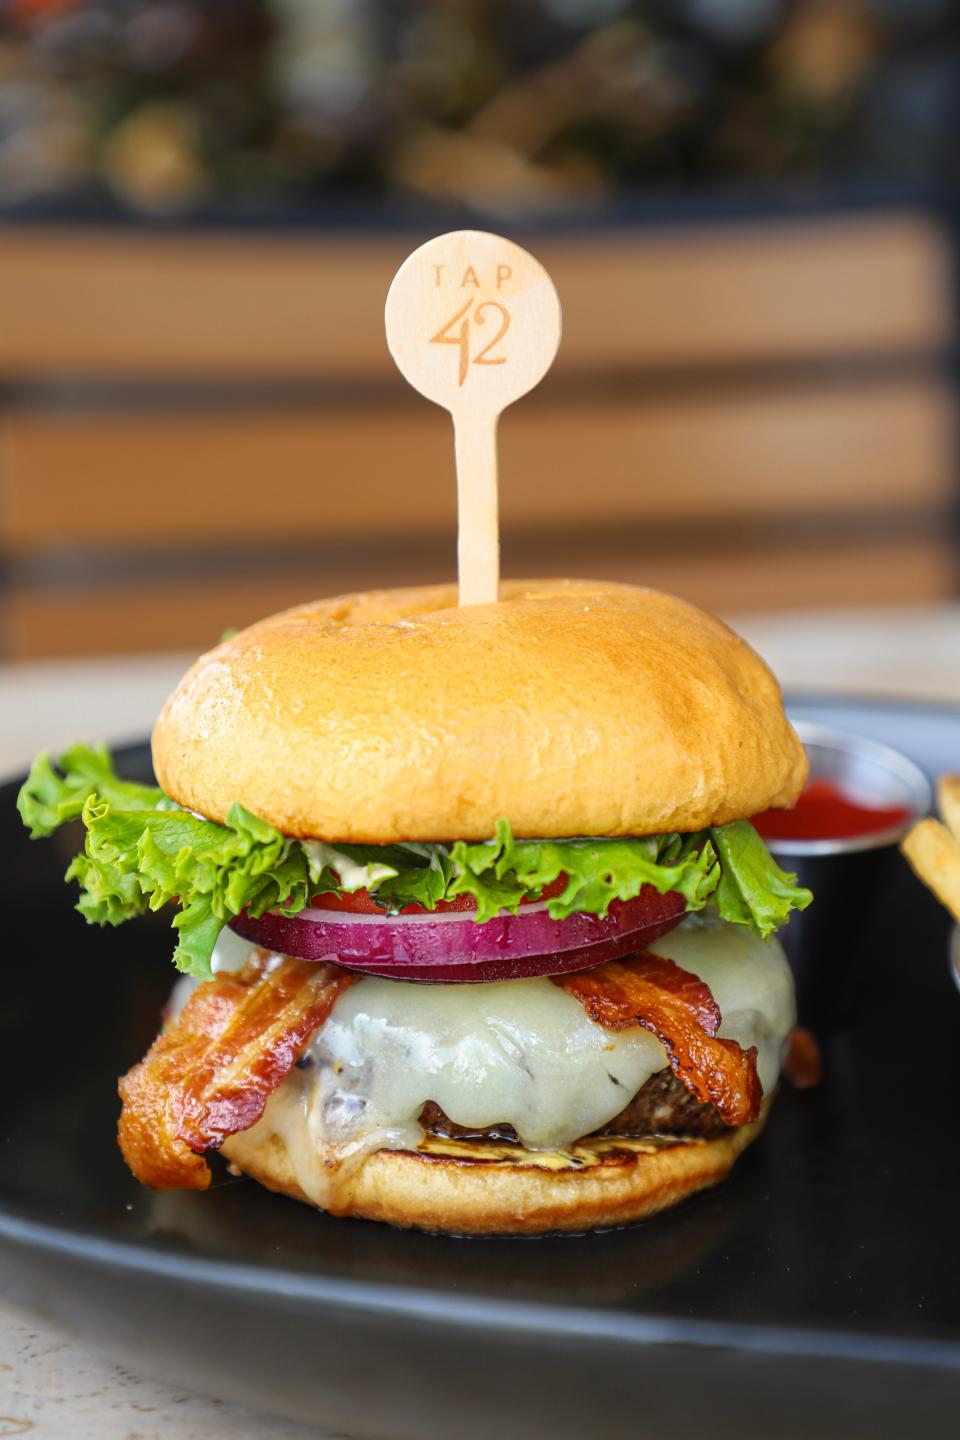 Tap 42's Prohibition Burger layers apple-wood bacon, white cheddar and other toppings over a burger-blend patty.